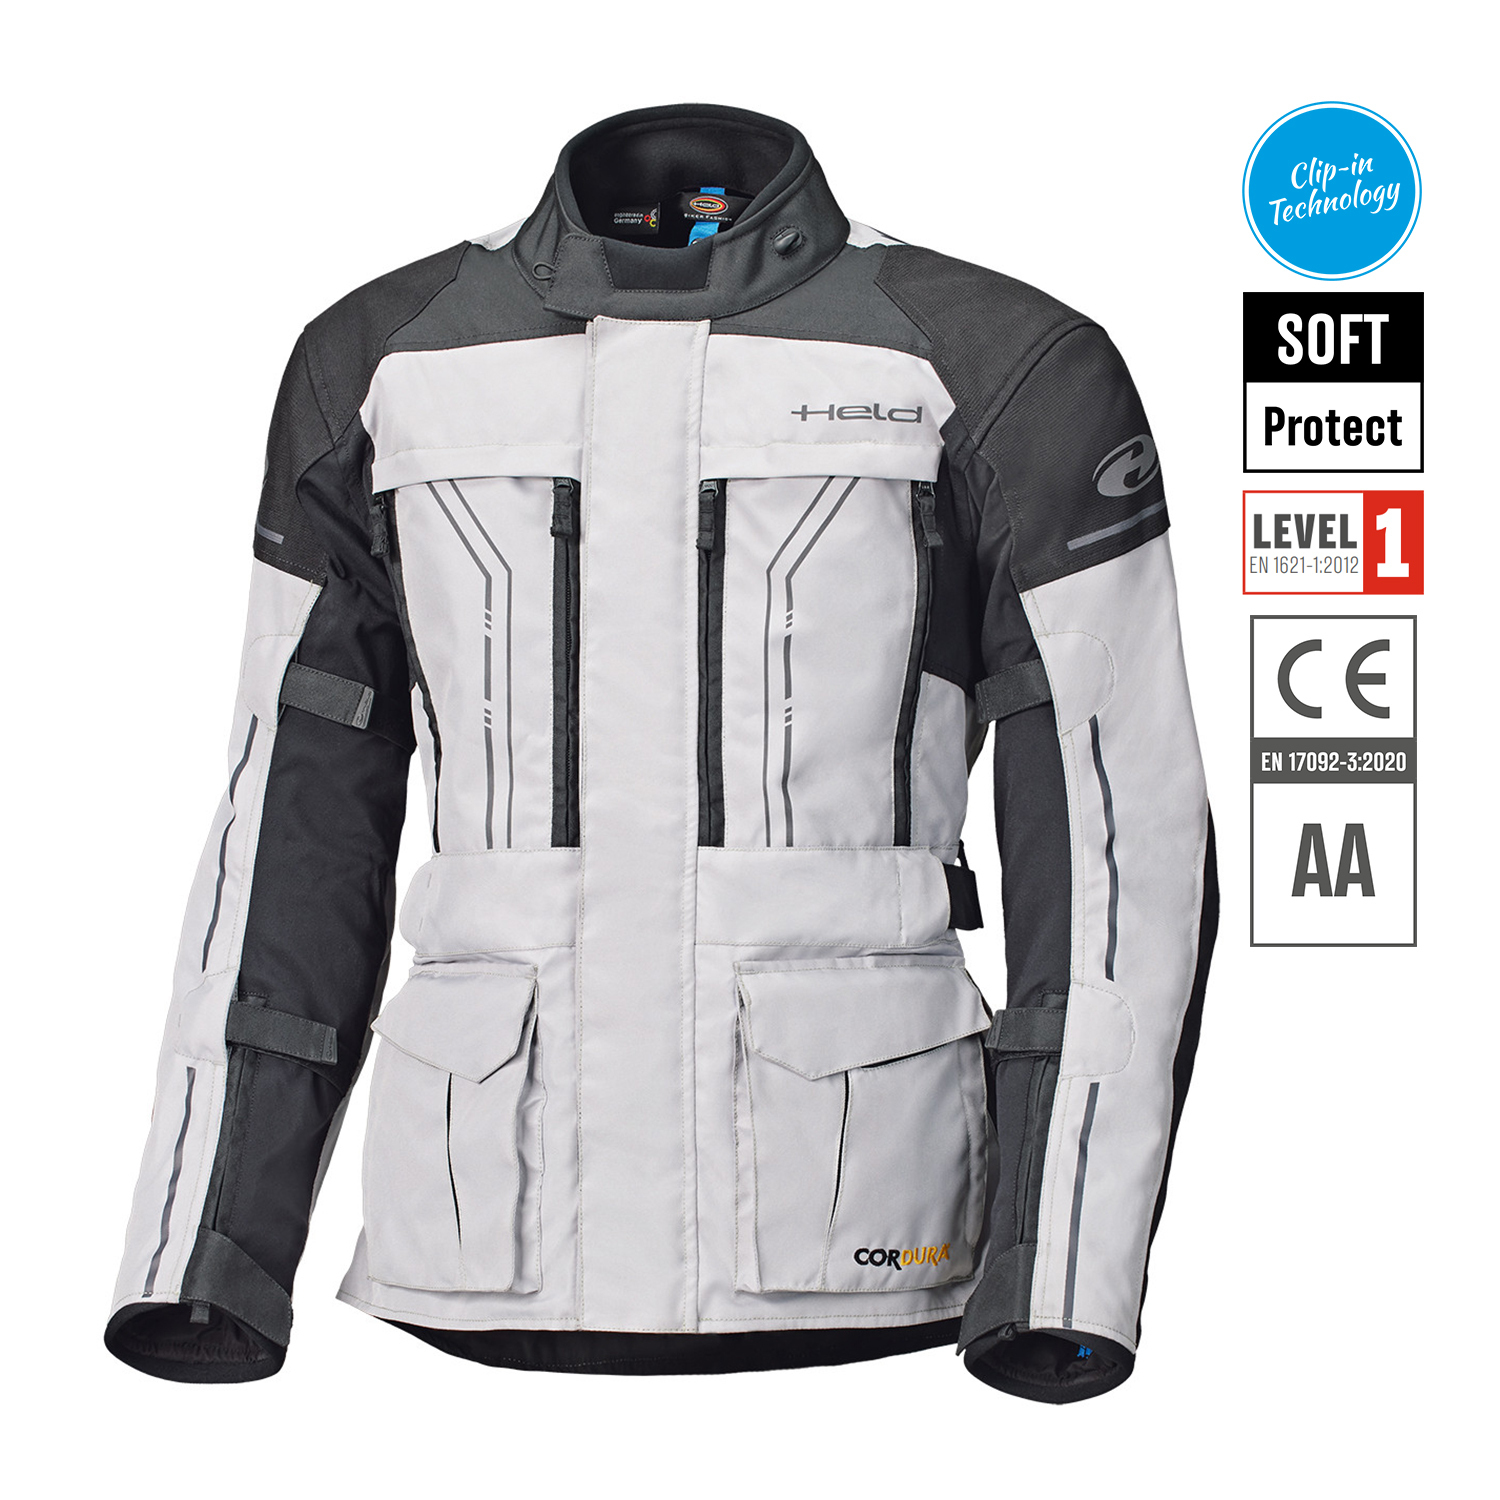 Held Pentland Jacket Grey-Black - Available in Various Sizes